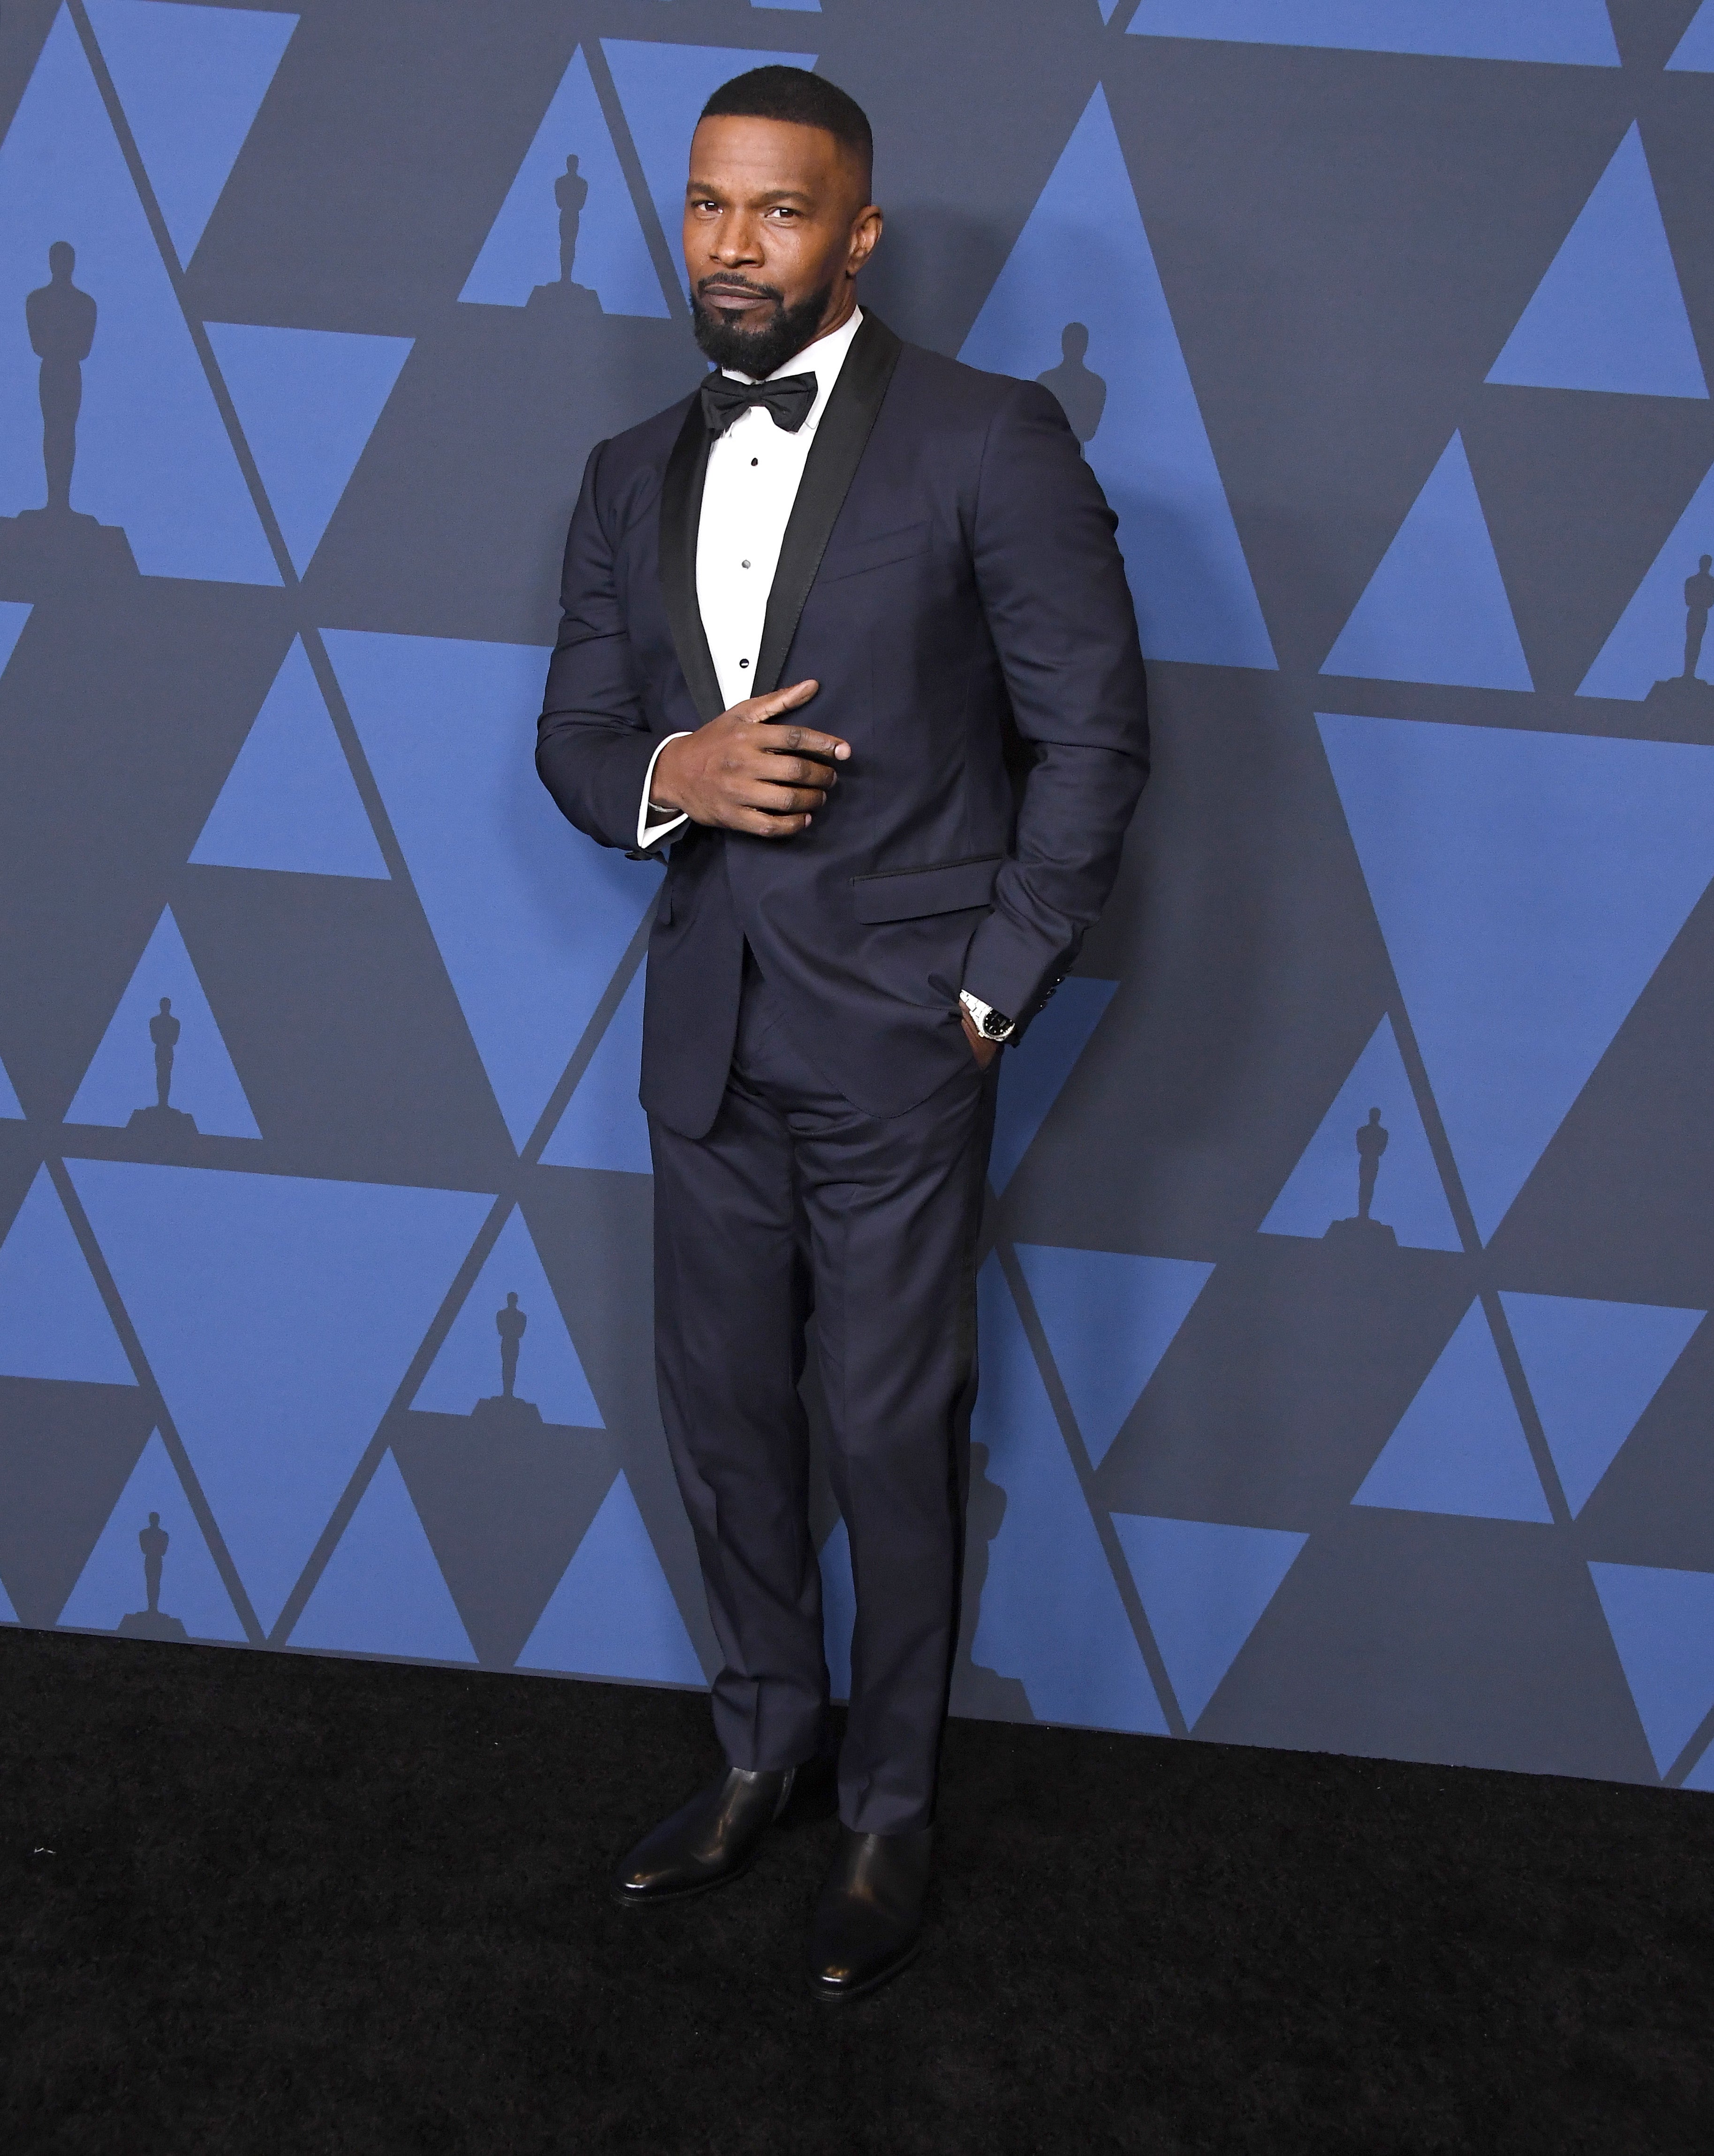 Black Hollywood Was Out In Full Force At The Academy’s Honorary Governors Awards